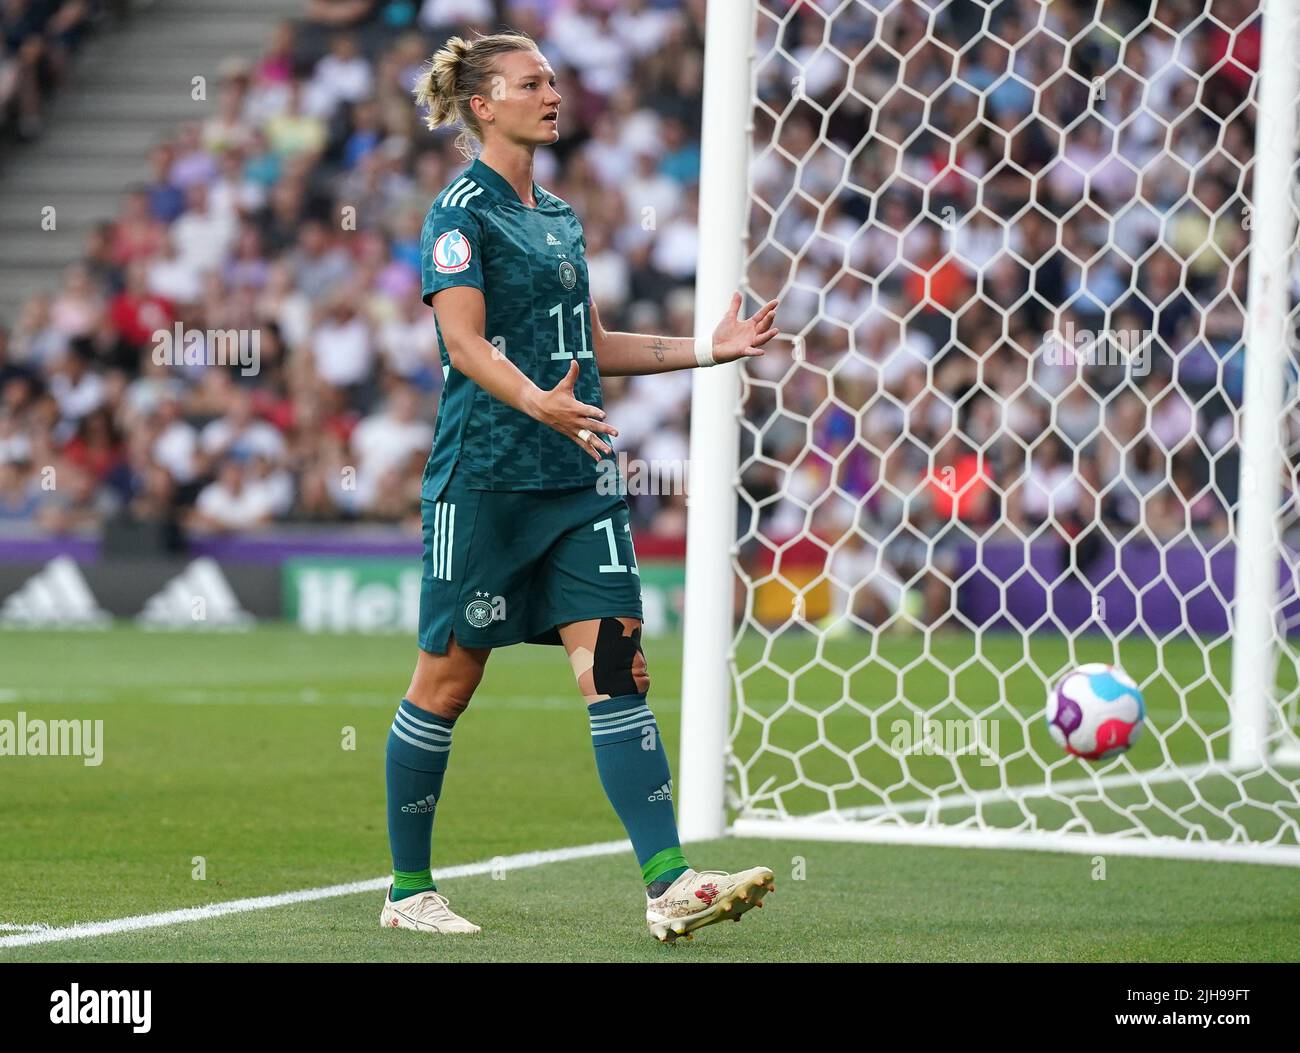 Germany's Alexandra Popp reacts after missing an attempt at goal during the UEFA Women's Euro 2022 Group B match at Stadium MK, Milton Keynes. Picture date: Saturday July 16, 2022. Stock Photo